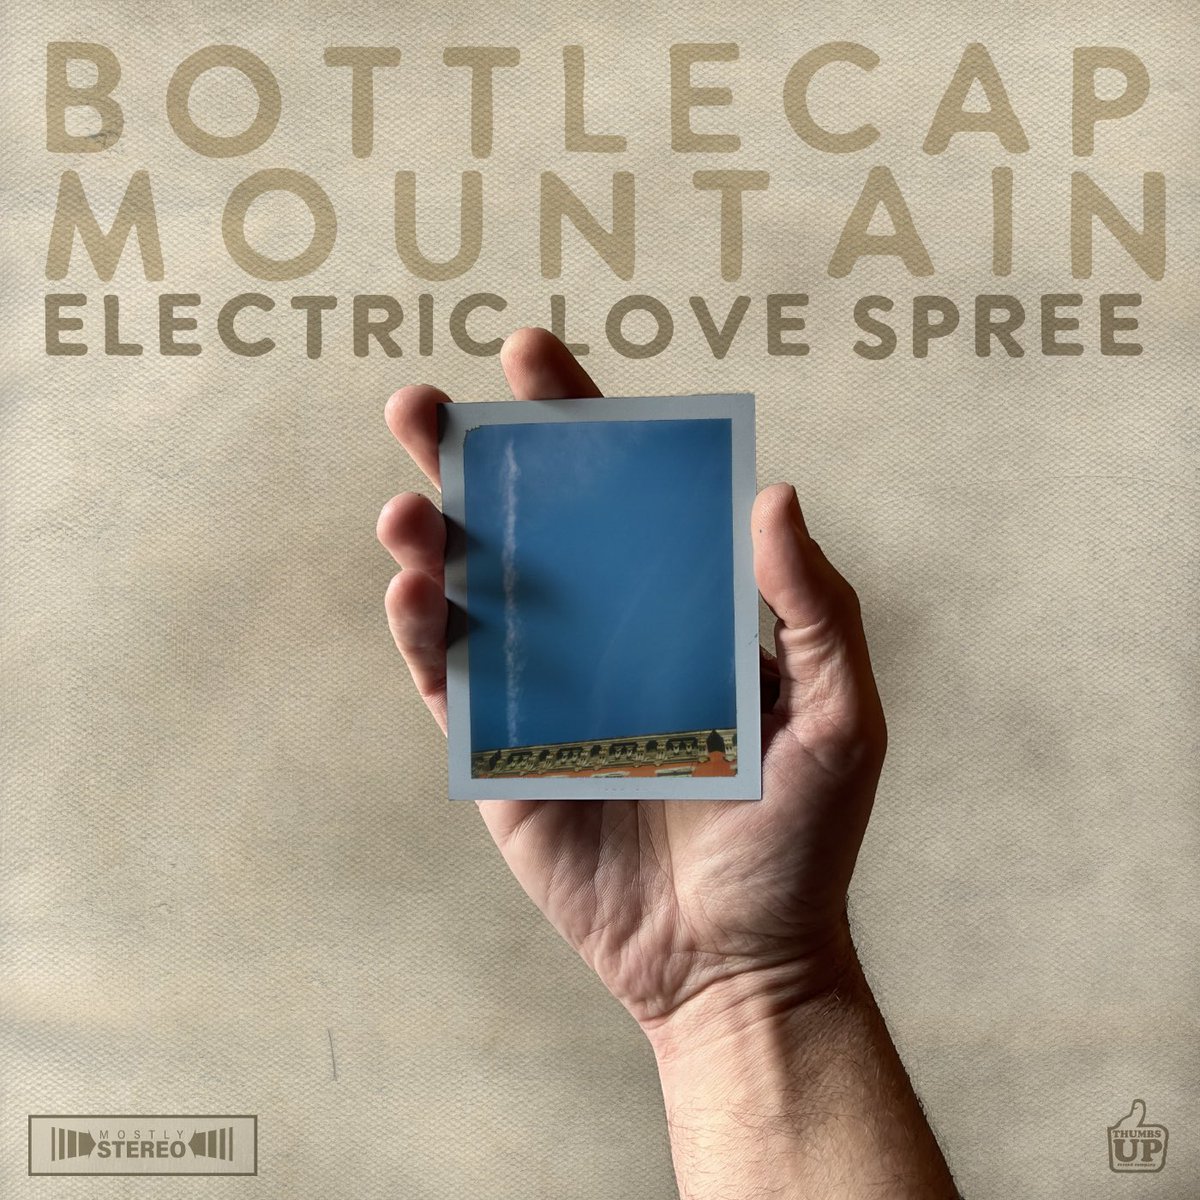 You, yes YOU, can pre-order our new record “Electric Love Spree” on Bandcamp which releases officially Tuesday, June 4th! bottlecapmountain.bandcamp.com/album/electric…